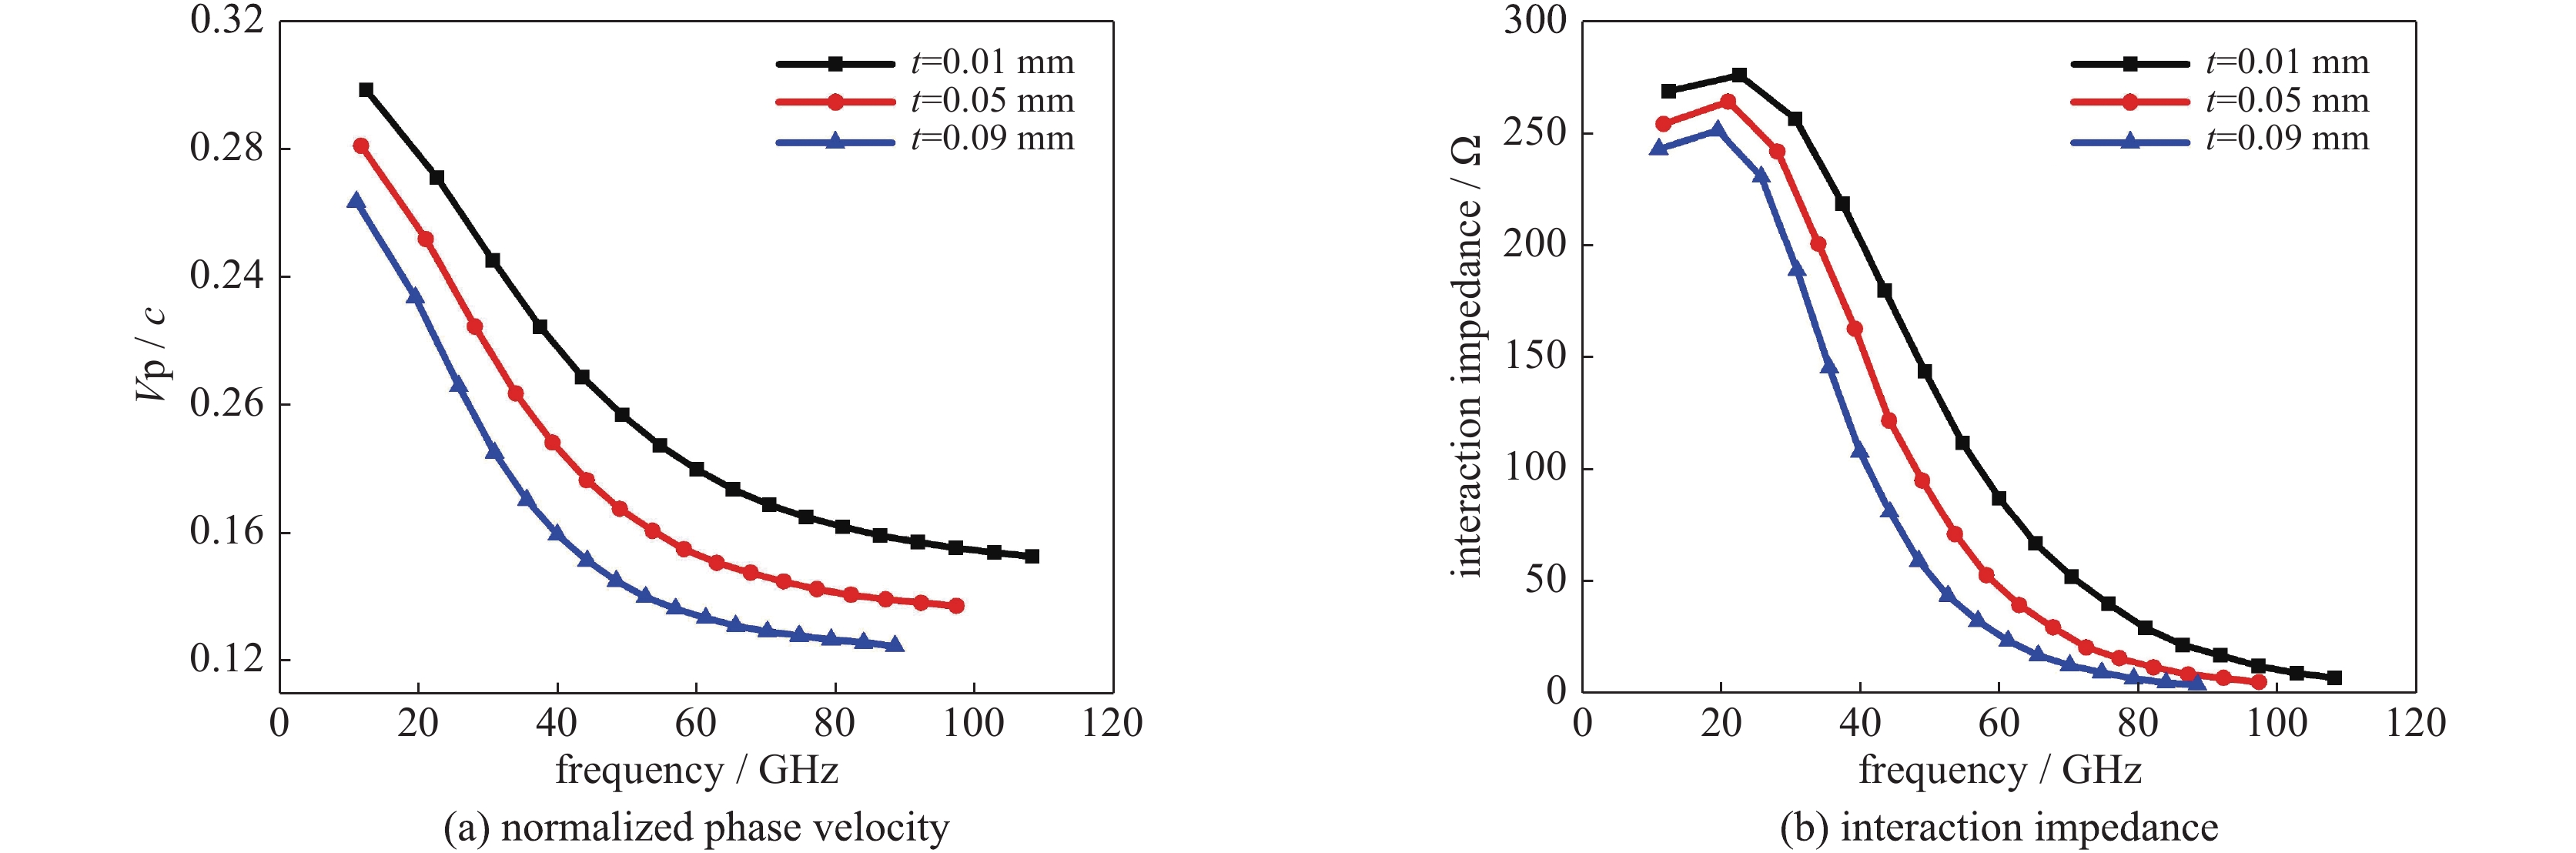 Effect of helix thickness on high-frequency characteristics with parameters of (in mm) b/a＝2, a＝0.10, w＝0.06, p＝0.20, c＝1.00, d＝1.00